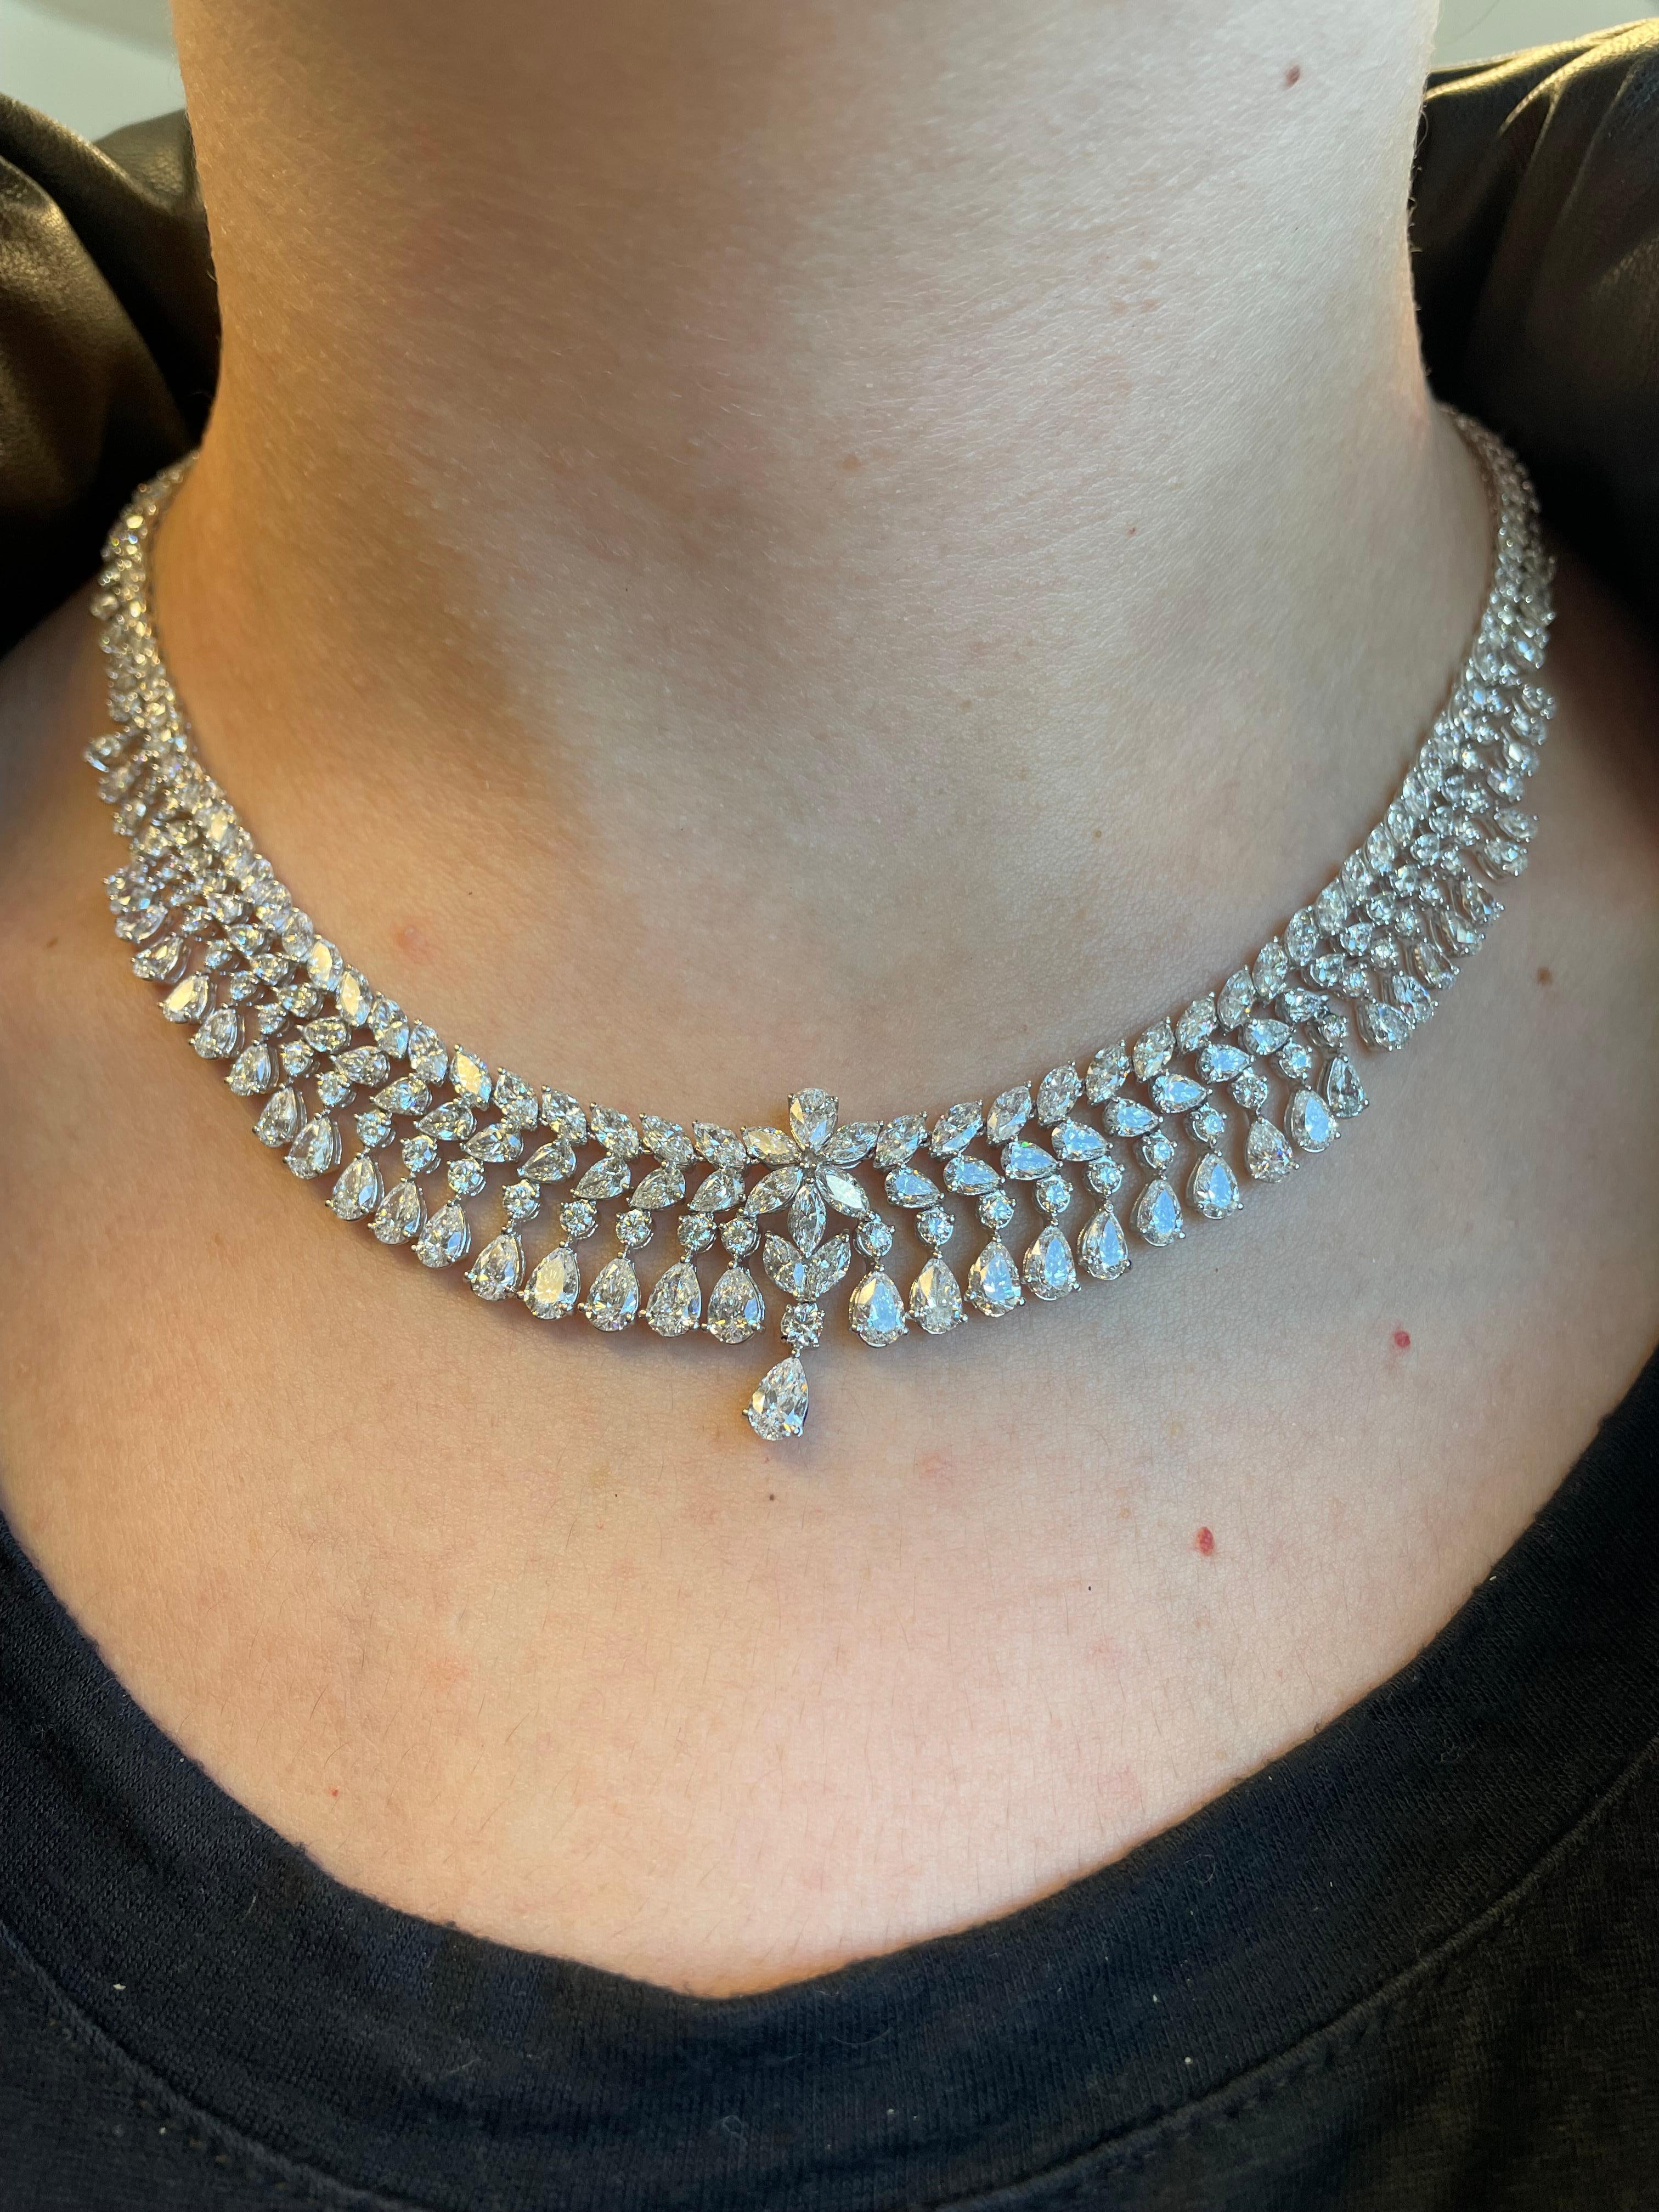 Exquisite diamond layout necklace. Created by Alexander of Beverly Hills.
29.58 carats of round brilliant, pear, and marquise cut diamonds. Approximately G/H color and VS2/SI1 clarity. 18k white gold. 
Accommodated with an up-to-date appraisal by a